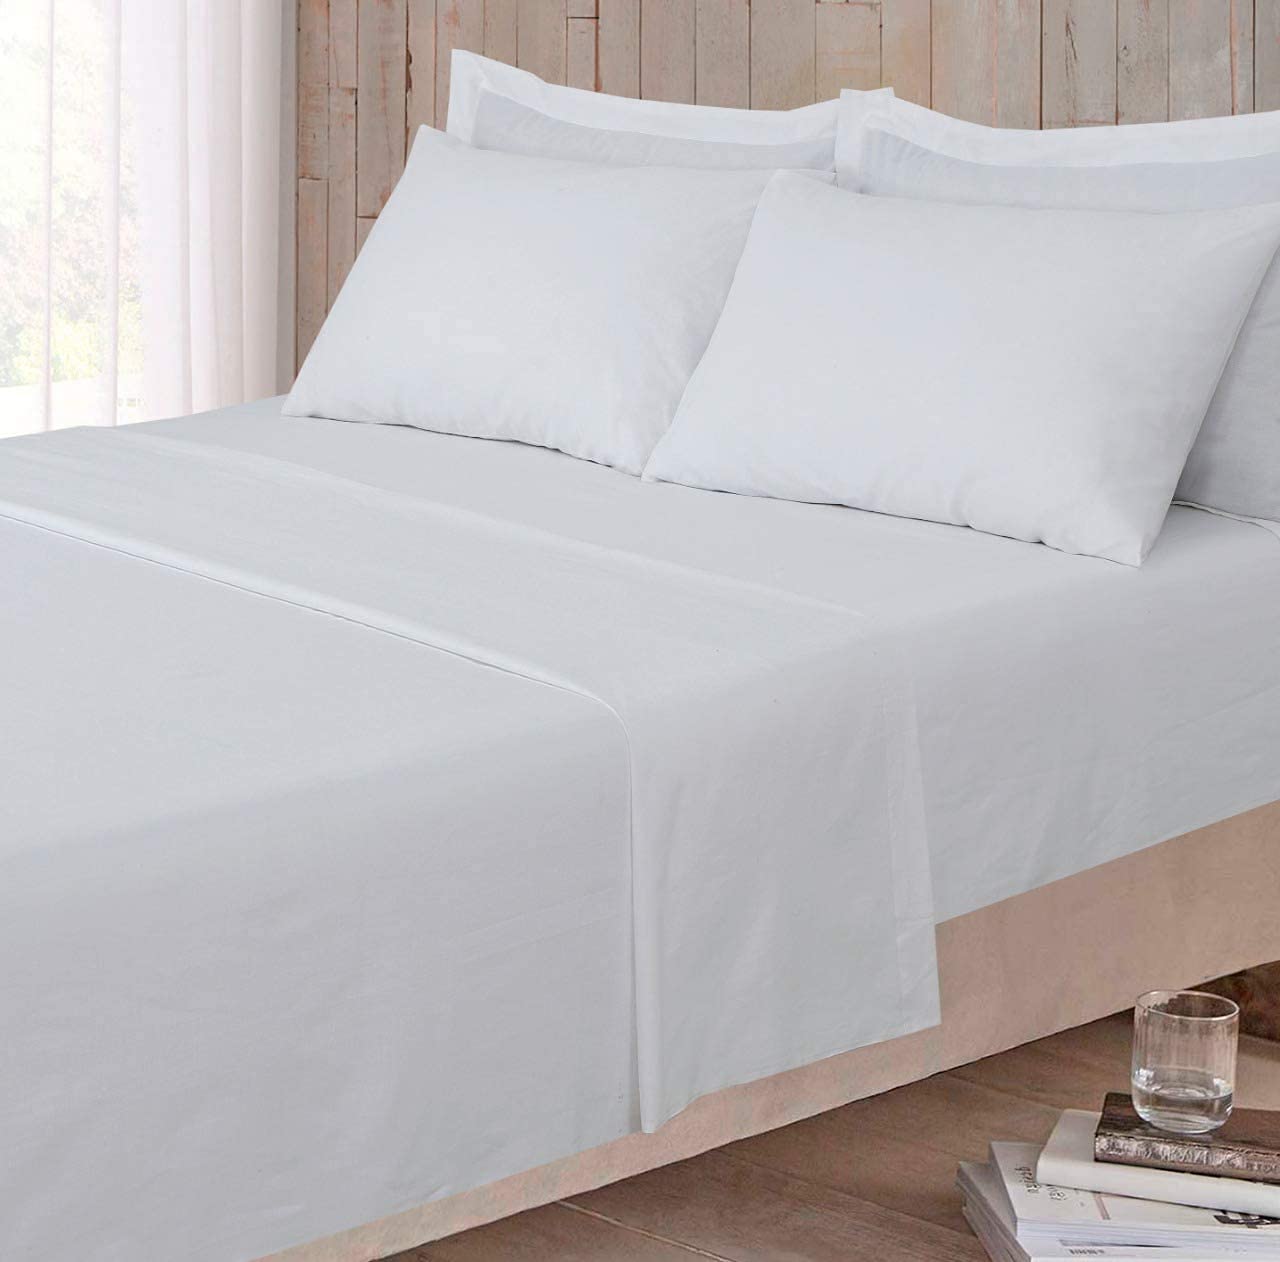 Flat Sheets - 800 Thread Count - 100% Egyptian Cotton Hotel Sateen Quality Bedding - White - Super King